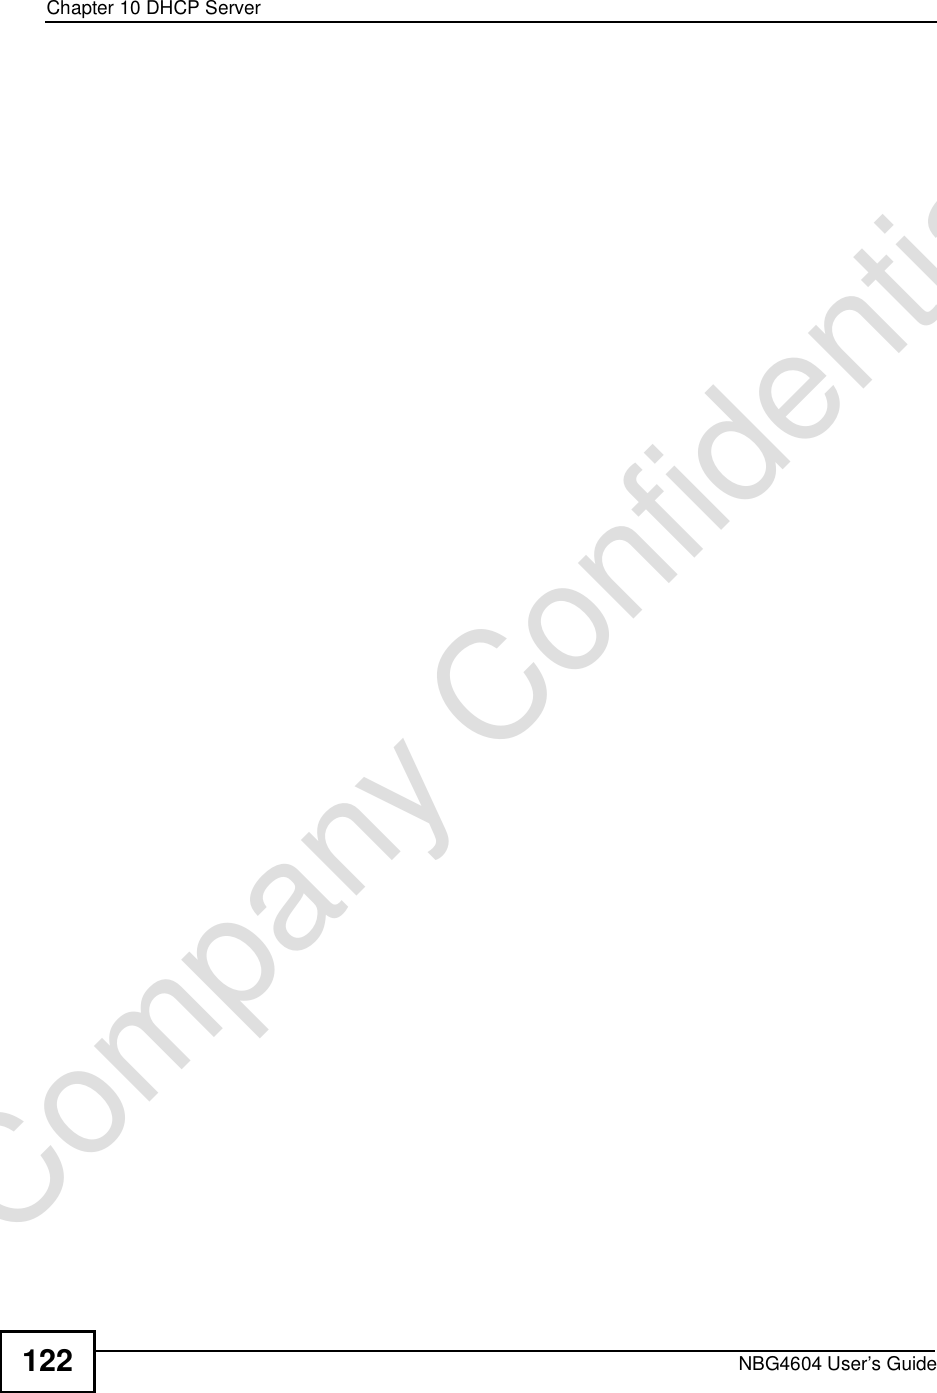 Chapter 10DHCP ServerNBG4604 User’s Guide122Company Confidential